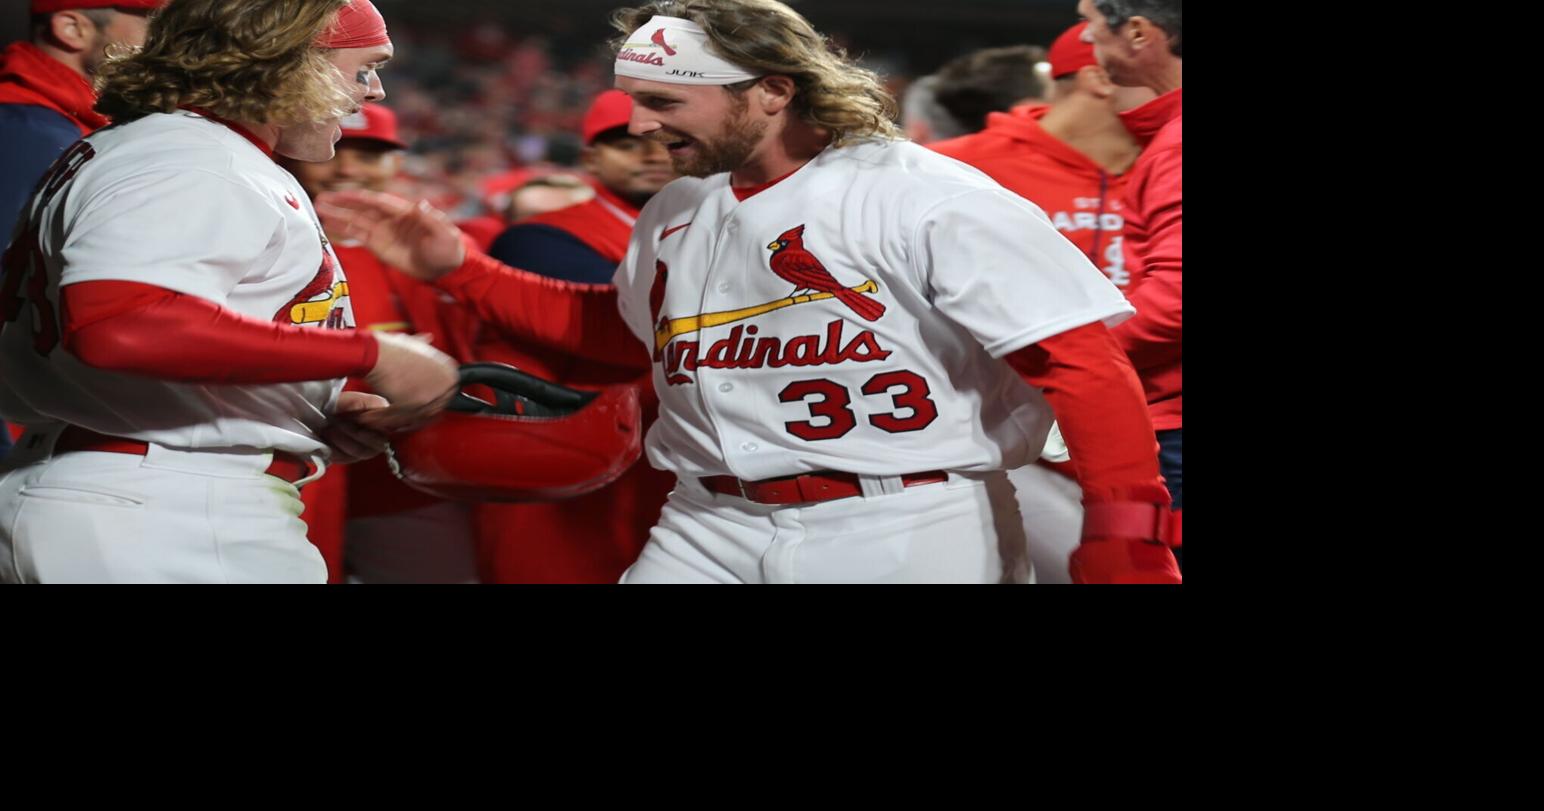 101 ESPN St. Louis - The Cardinals have optioned INF Brendan